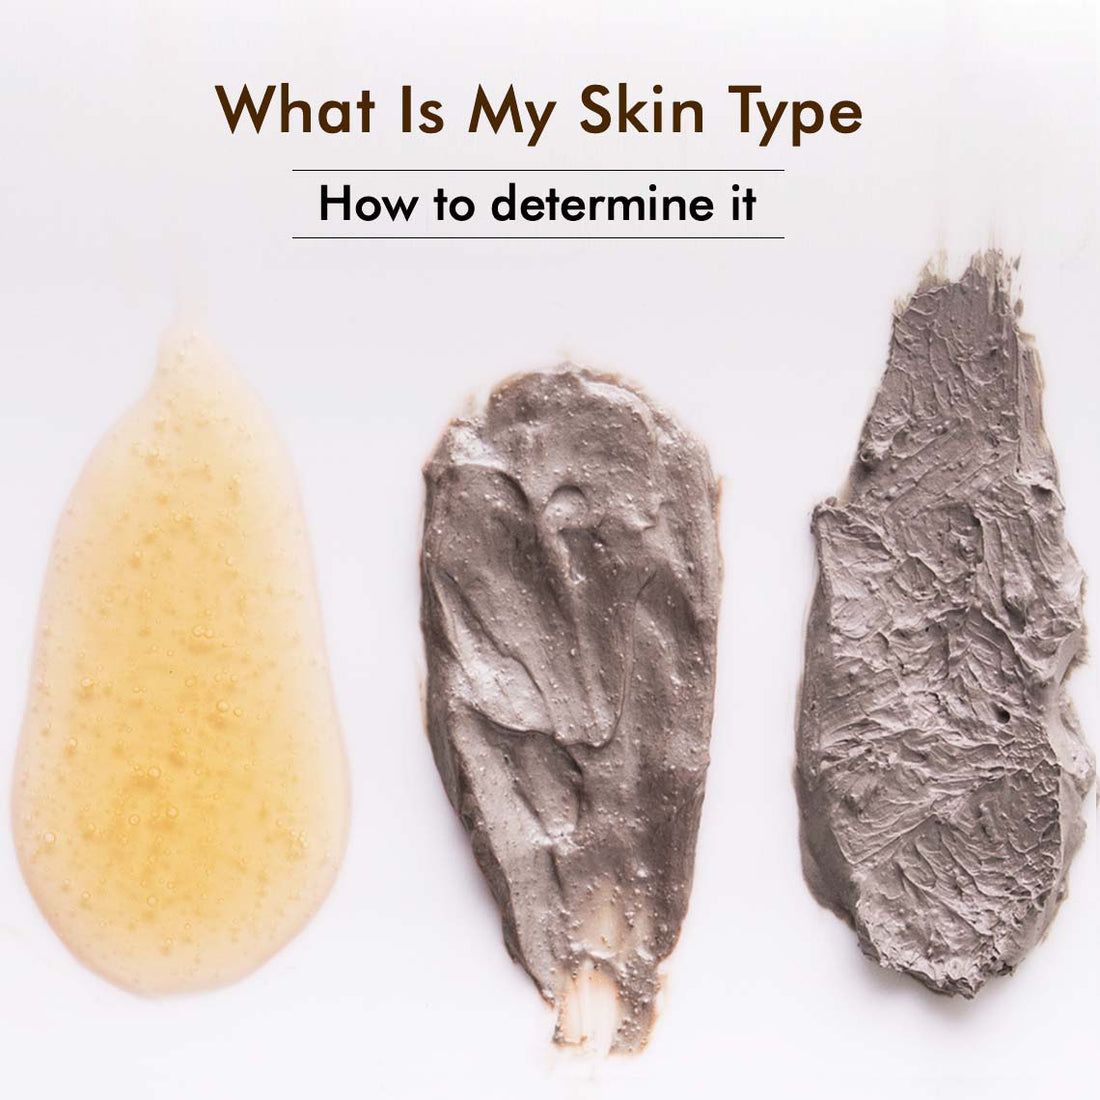 What Is My Skin Type - How To Determine It